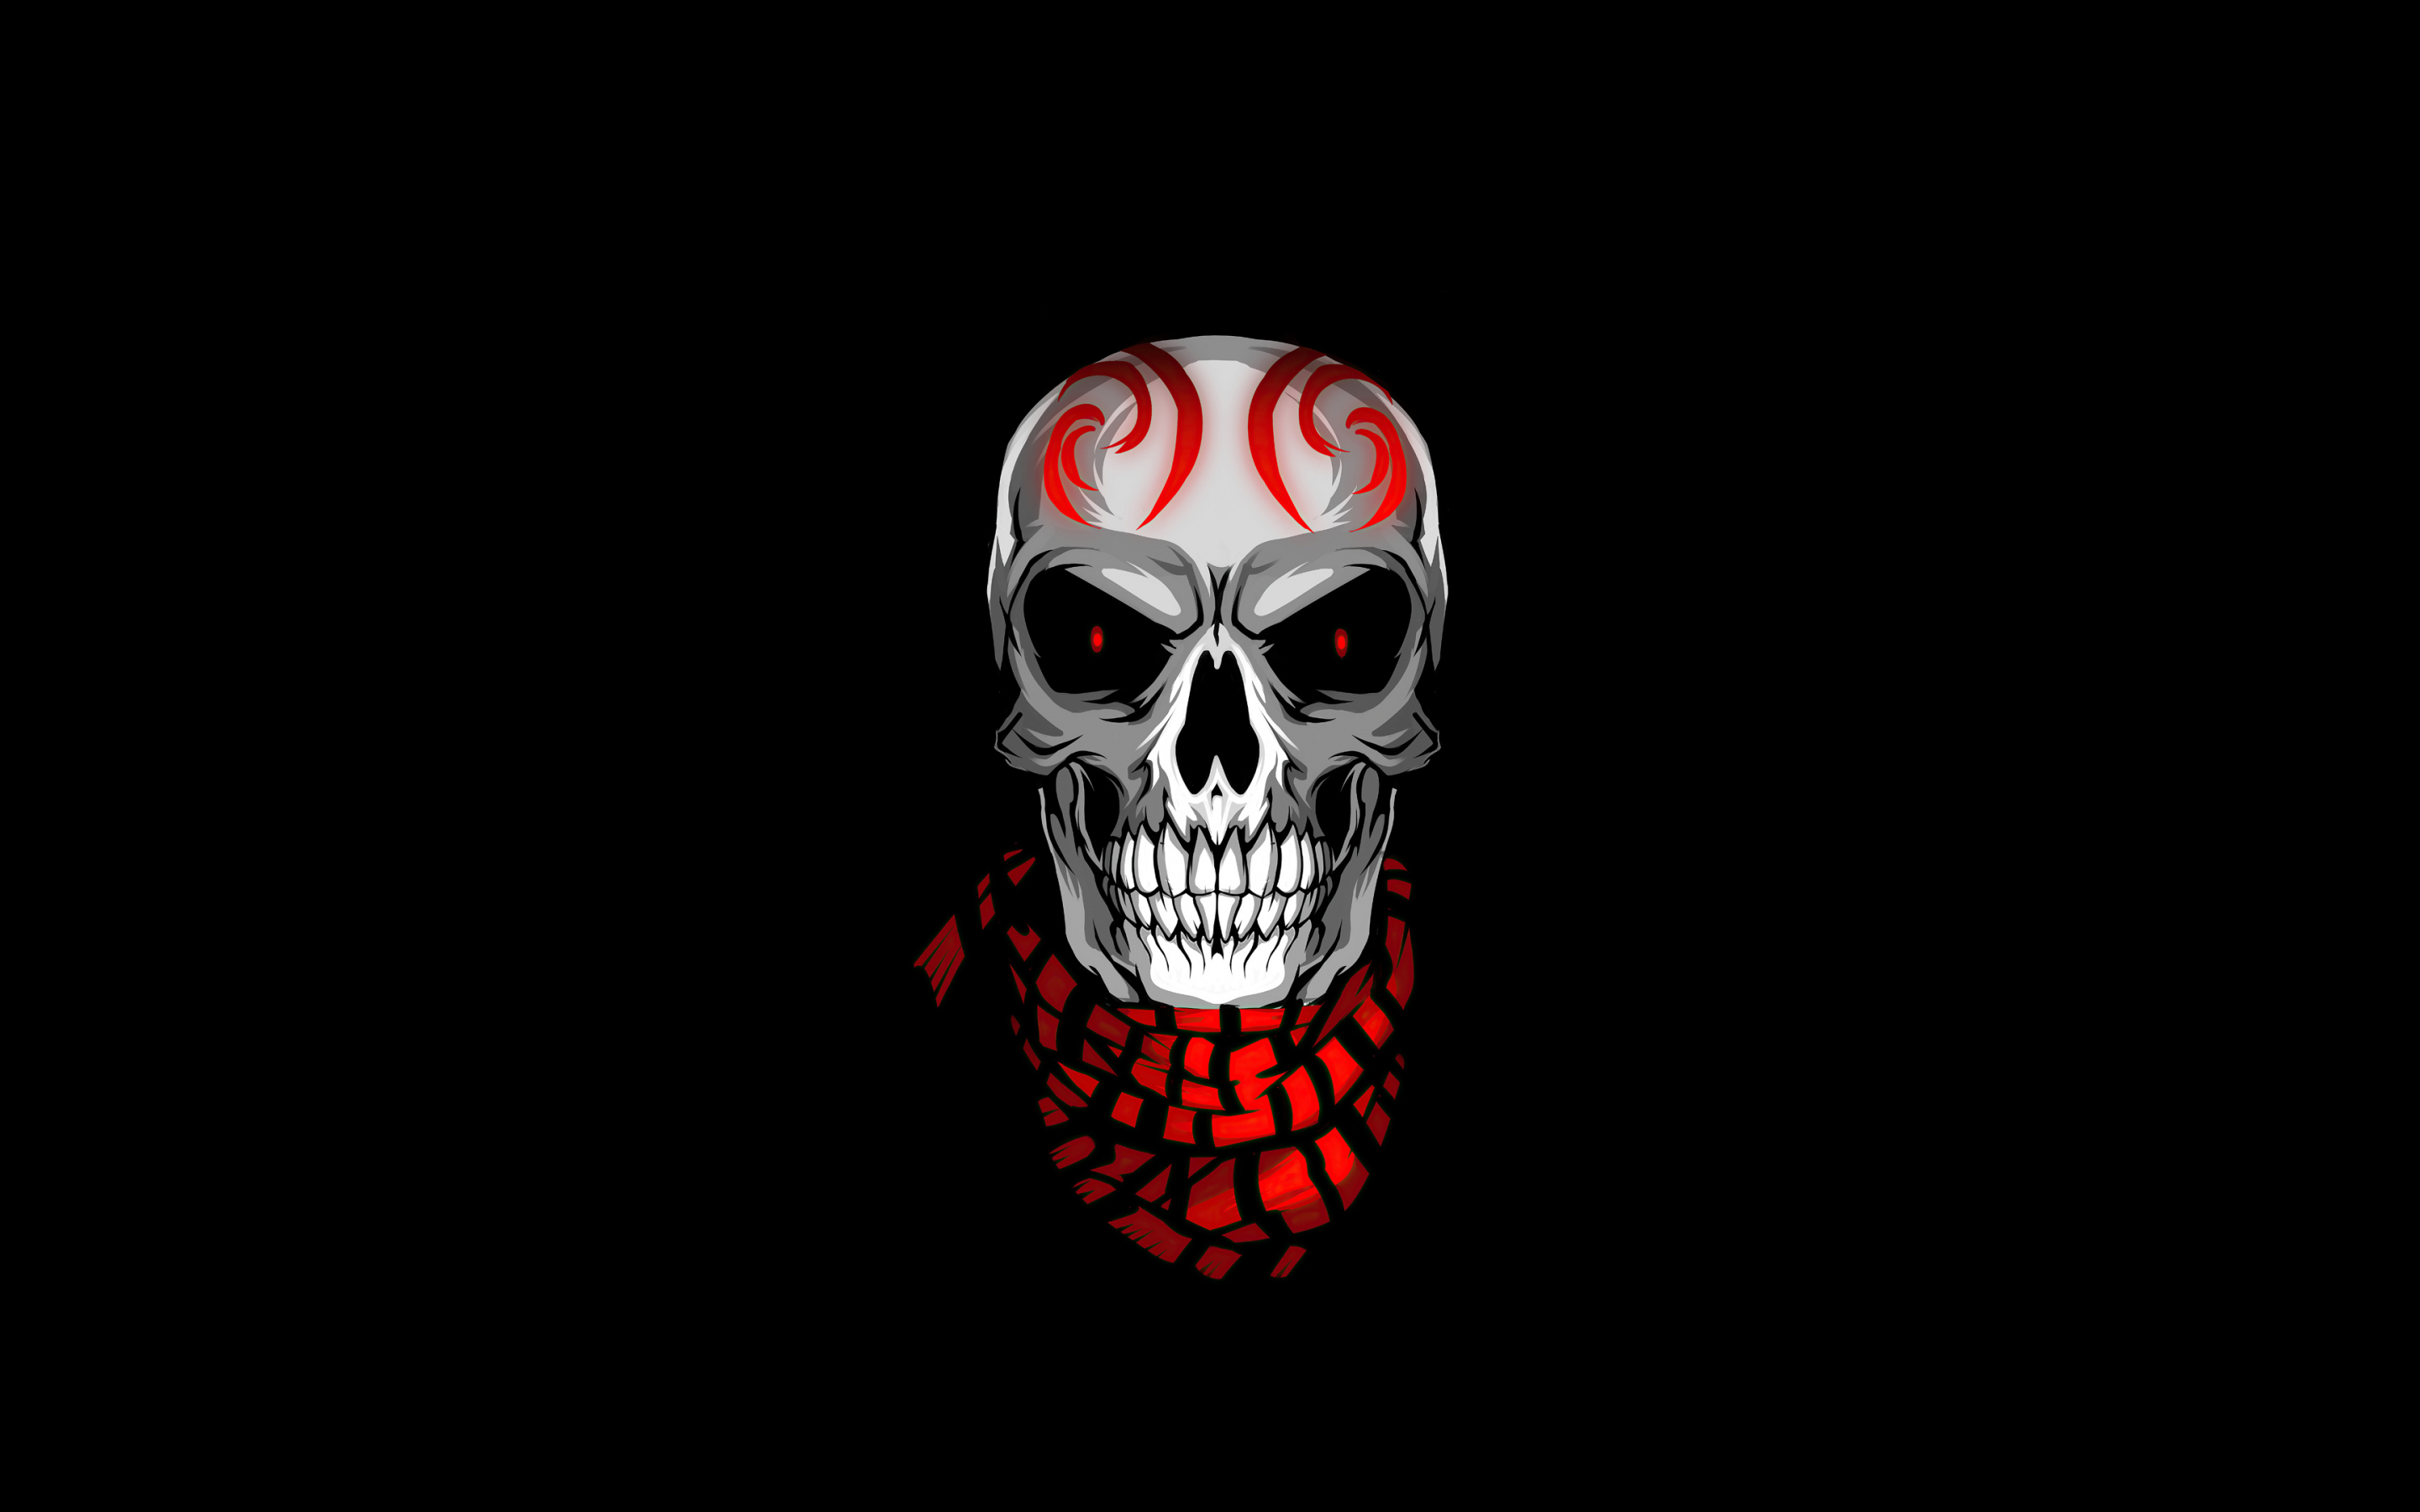 Skull with scarves, red eyes, minimal, 2880x1800 wallpaper